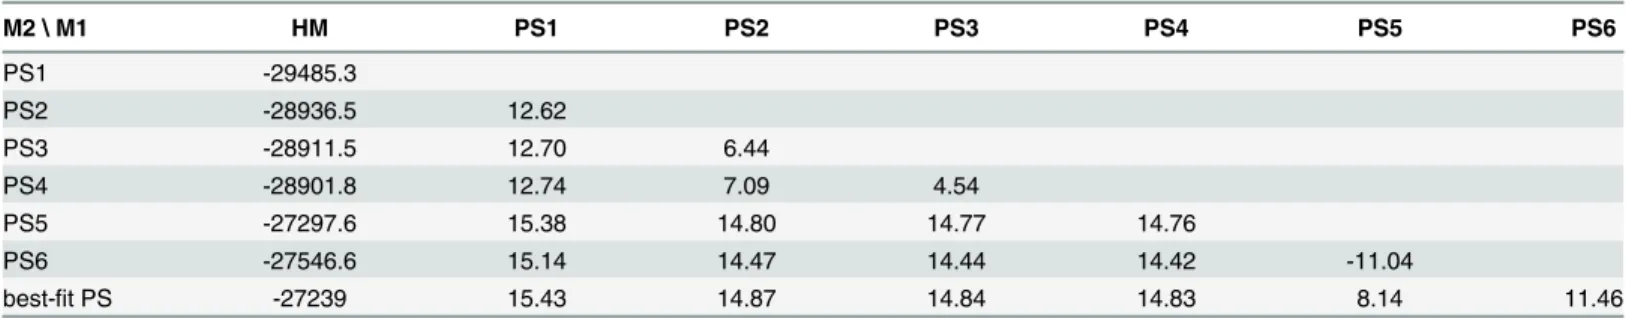 Table 2. Bayes factor comparisons between PSs of the 42-dataset. The rank of preference in PS is “best-fit = PS5 &gt; PS6 &gt; PS4 = PS3 = PS2 &gt; PS1”.